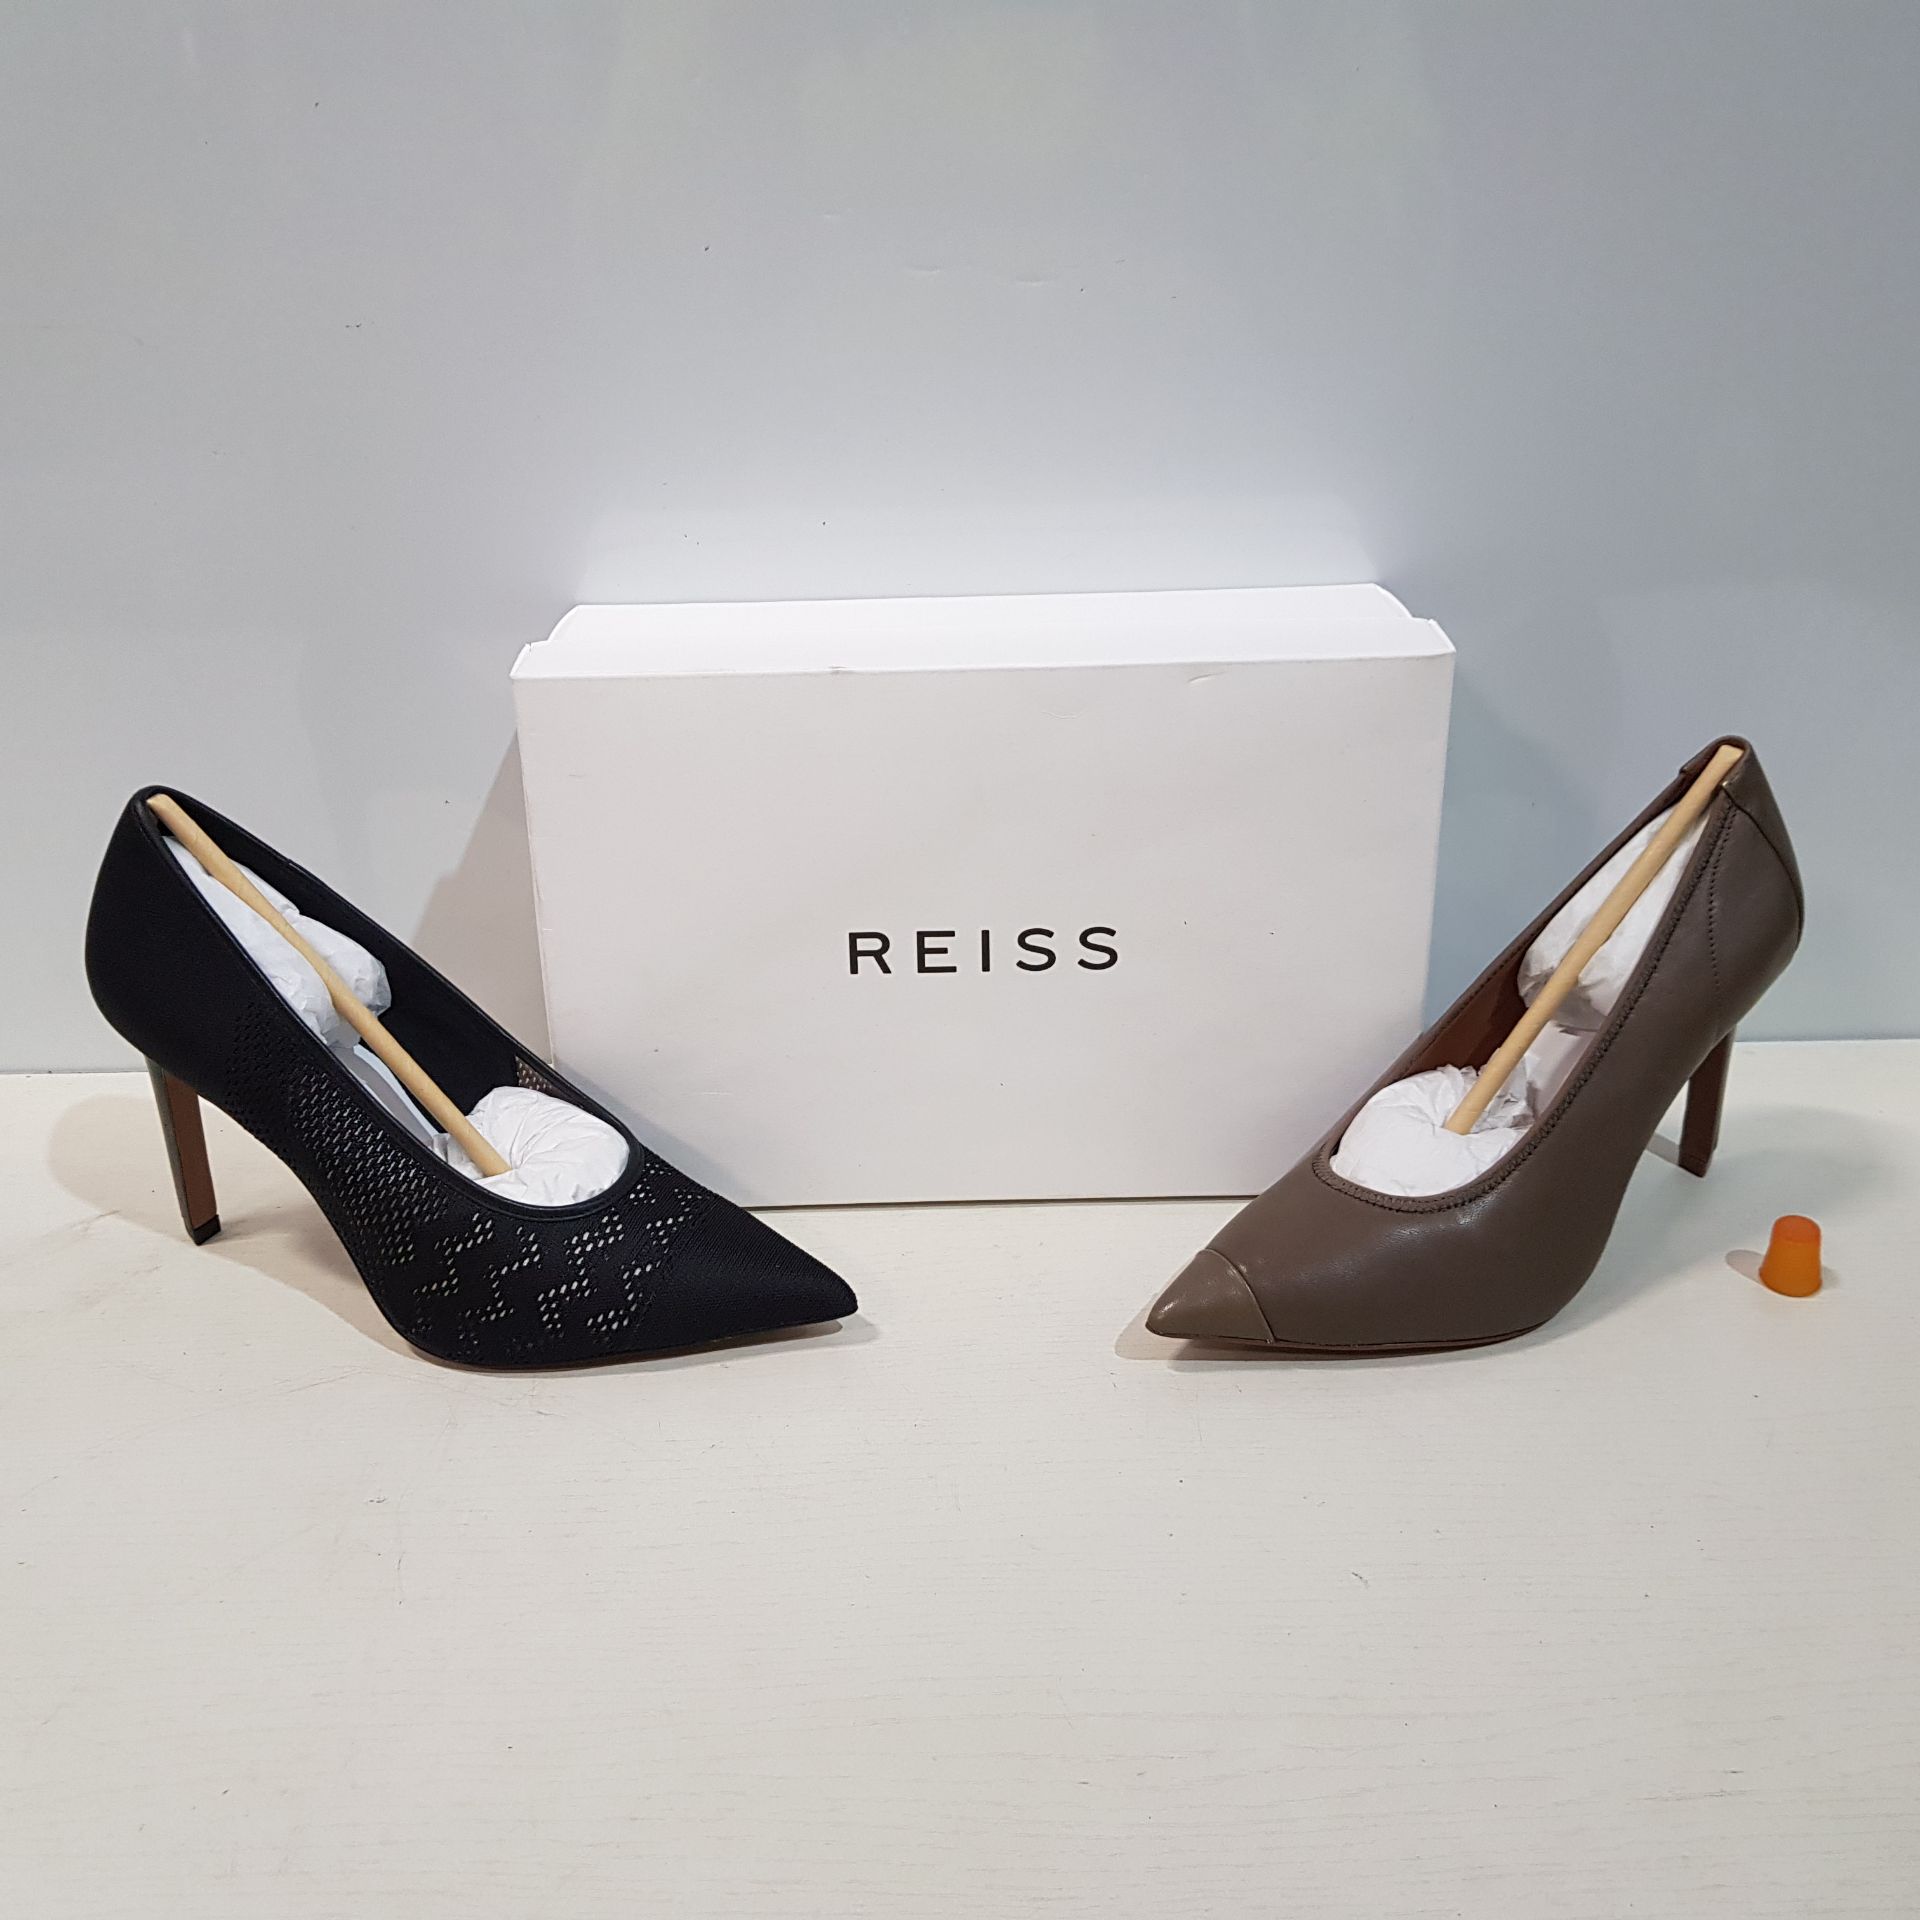 7 X PIECE BRAND NEW MIXED SHOE LOT CONTAINING REISS LOWRI COURT SHOES IN MID GREY SIZE UK 6 & ZENA